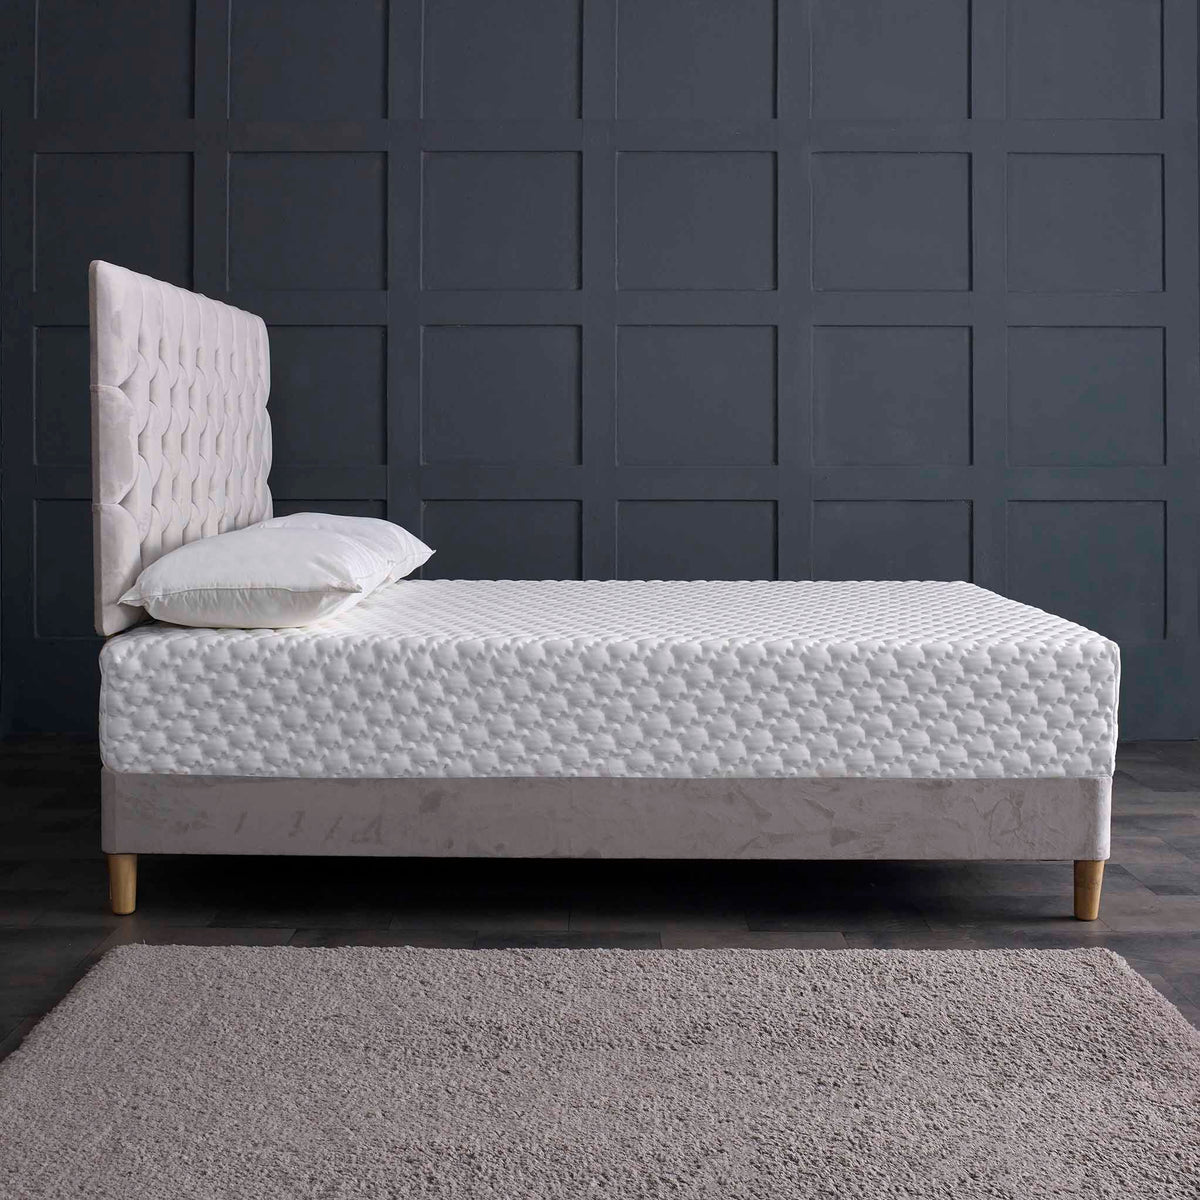 MemoryPedic Emperor Memory Support Mattresses with Revo & Latex Foam side lifestyle